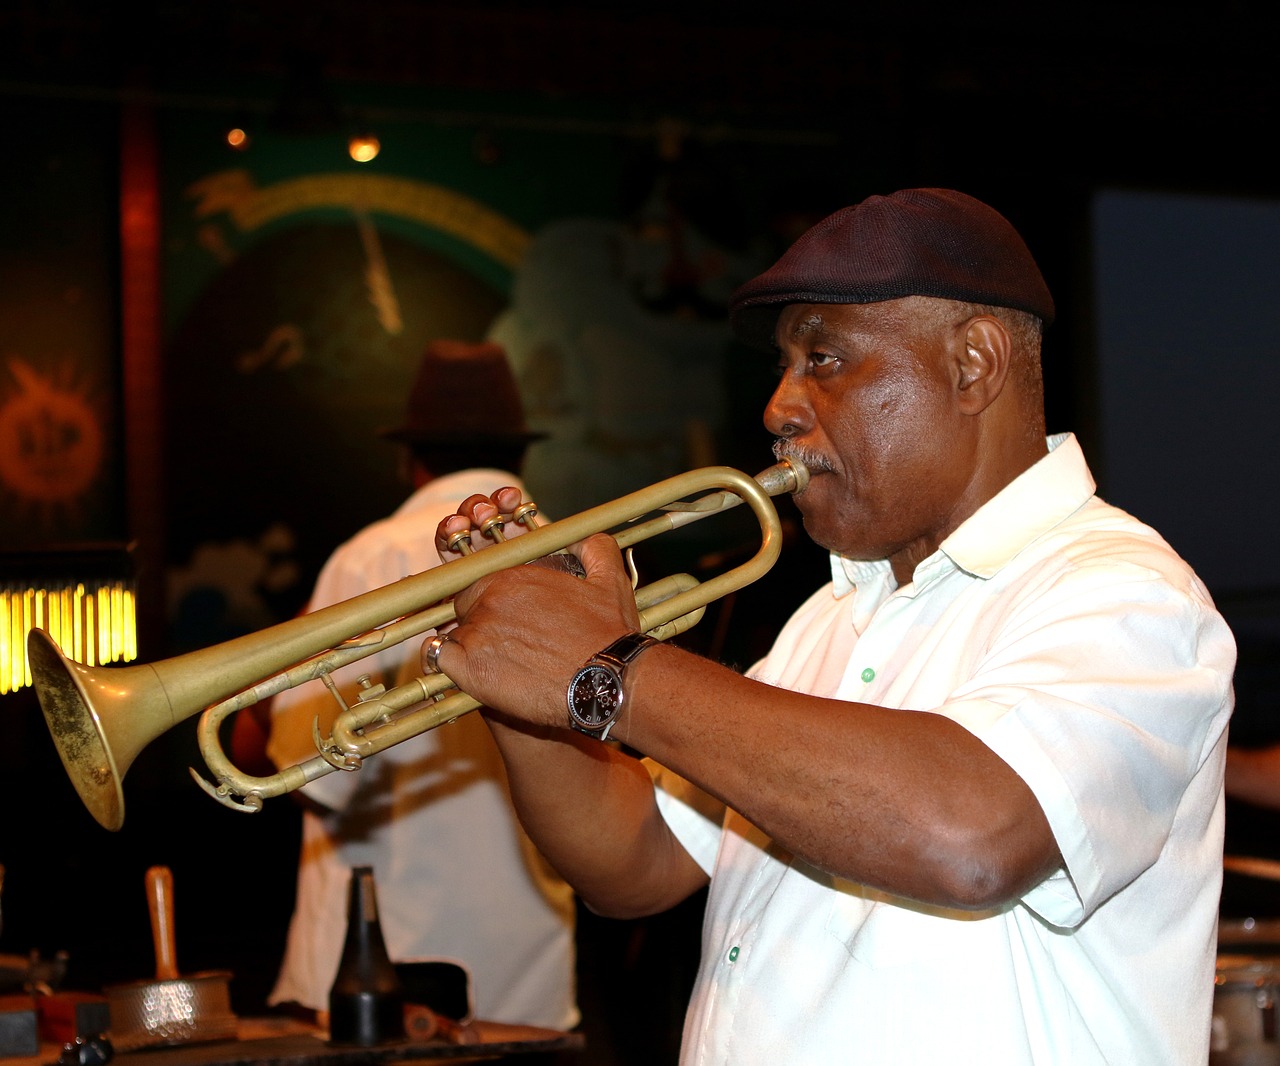 a man playing a trumpet in a bar, flickr, atiba jefferson, he is about 7 0 years old, stock photo, performing on stage